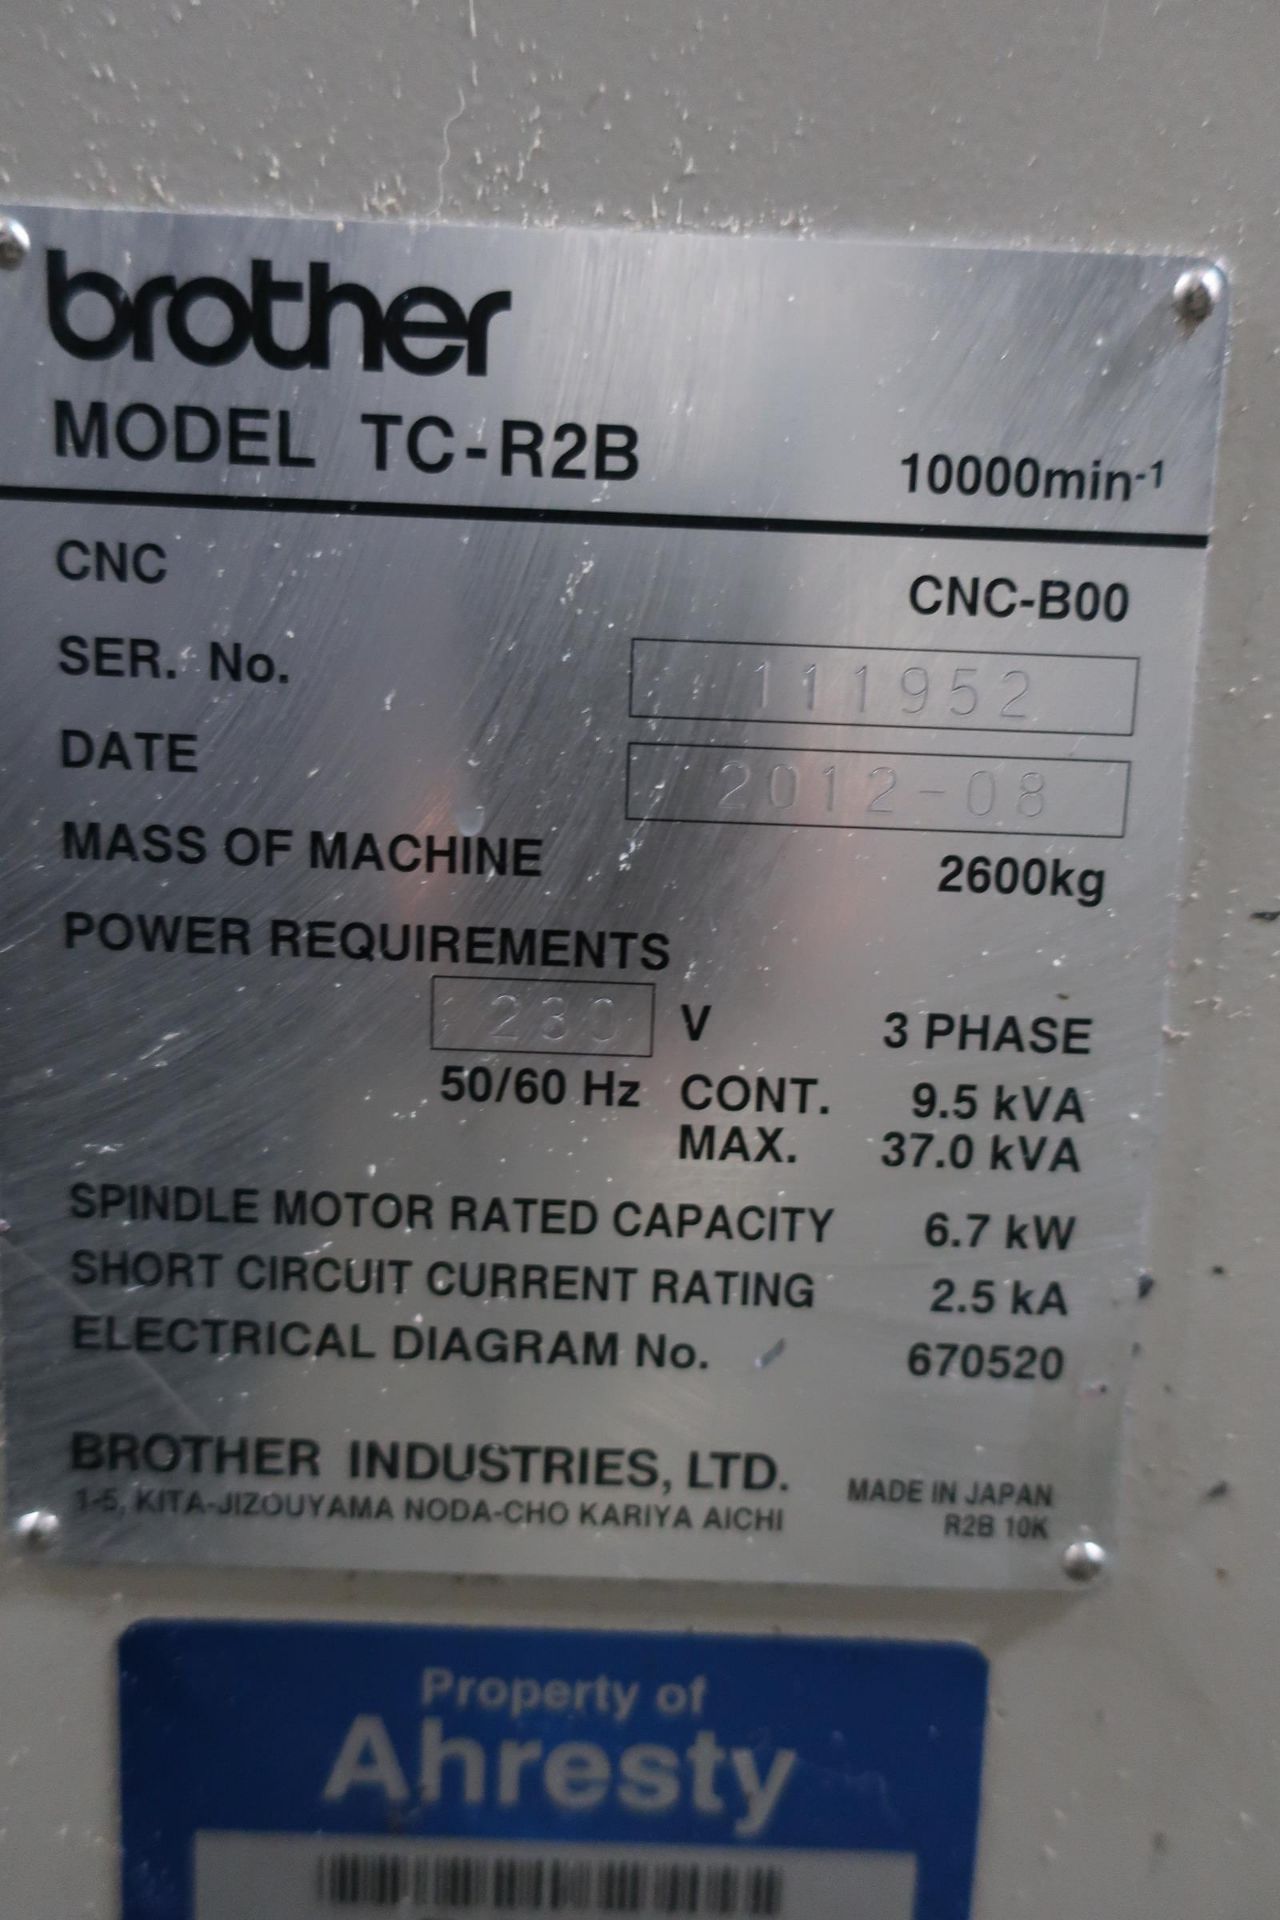 BROTHER TC-R2B CNC DRILL TAP VERTICAL MACHINING CENTER, S/N 111952, NEW 2012 - Image 10 of 10